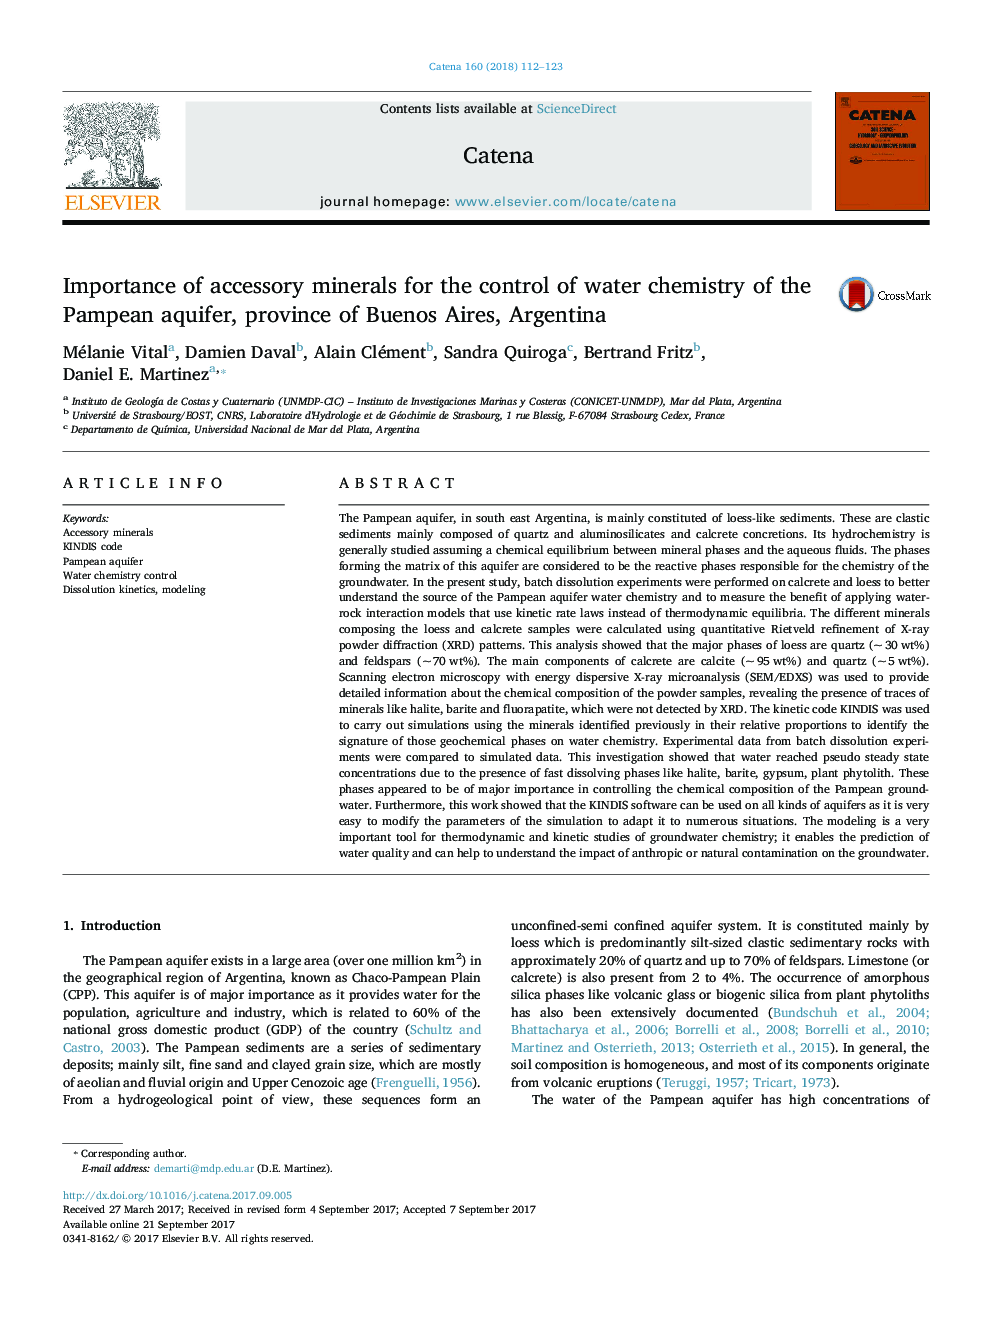 Importance of accessory minerals for the control of water chemistry of the Pampean aquifer, province of Buenos Aires, Argentina